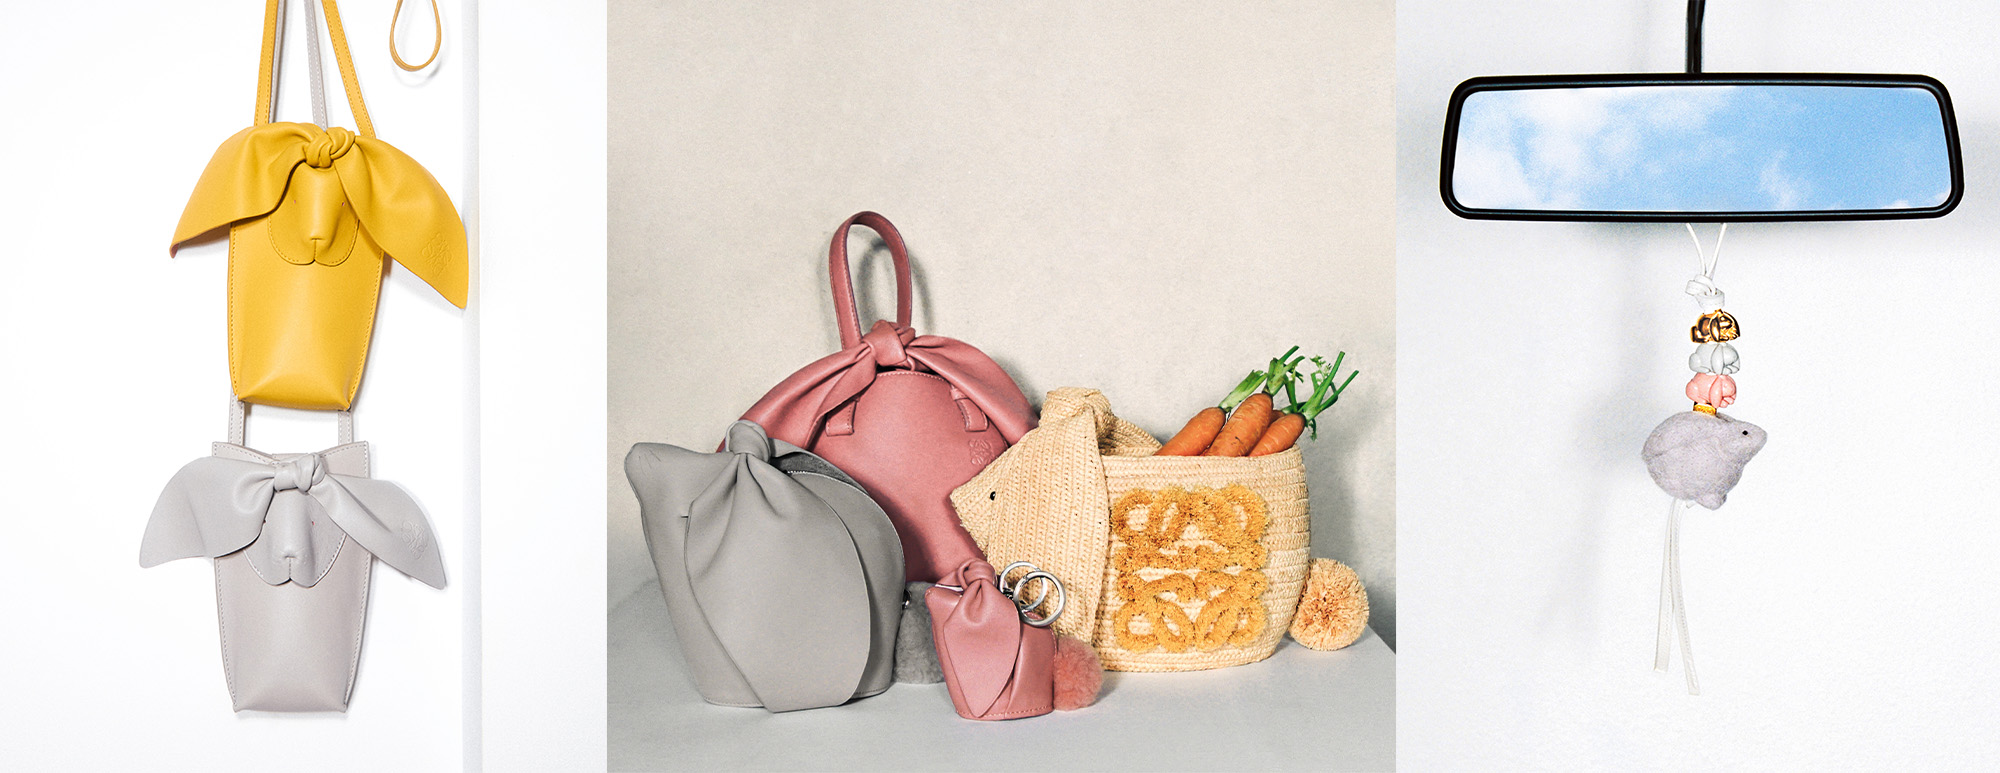 Adorable bunny accessories from LOEWE's Year of the Rabbit capsule ...